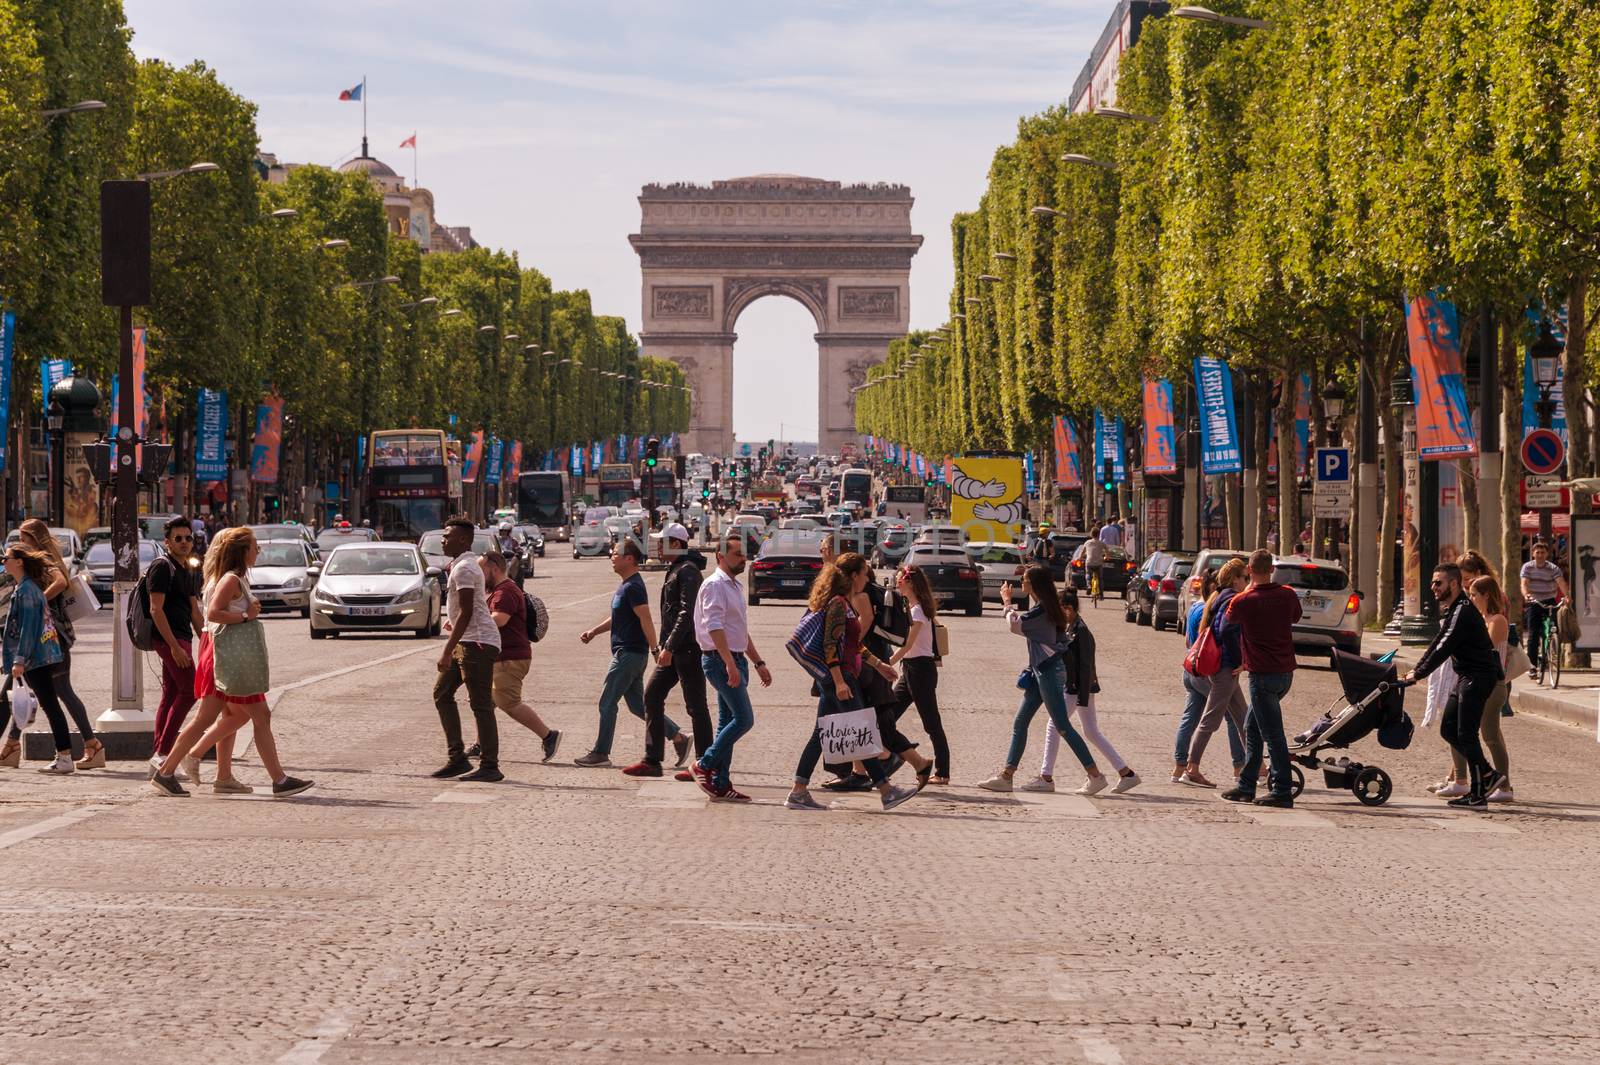 Paris, France - 23 June 2018: A crowd of people crossing Avenue des Champs-Elysees with Arc de Triomphe in the Background